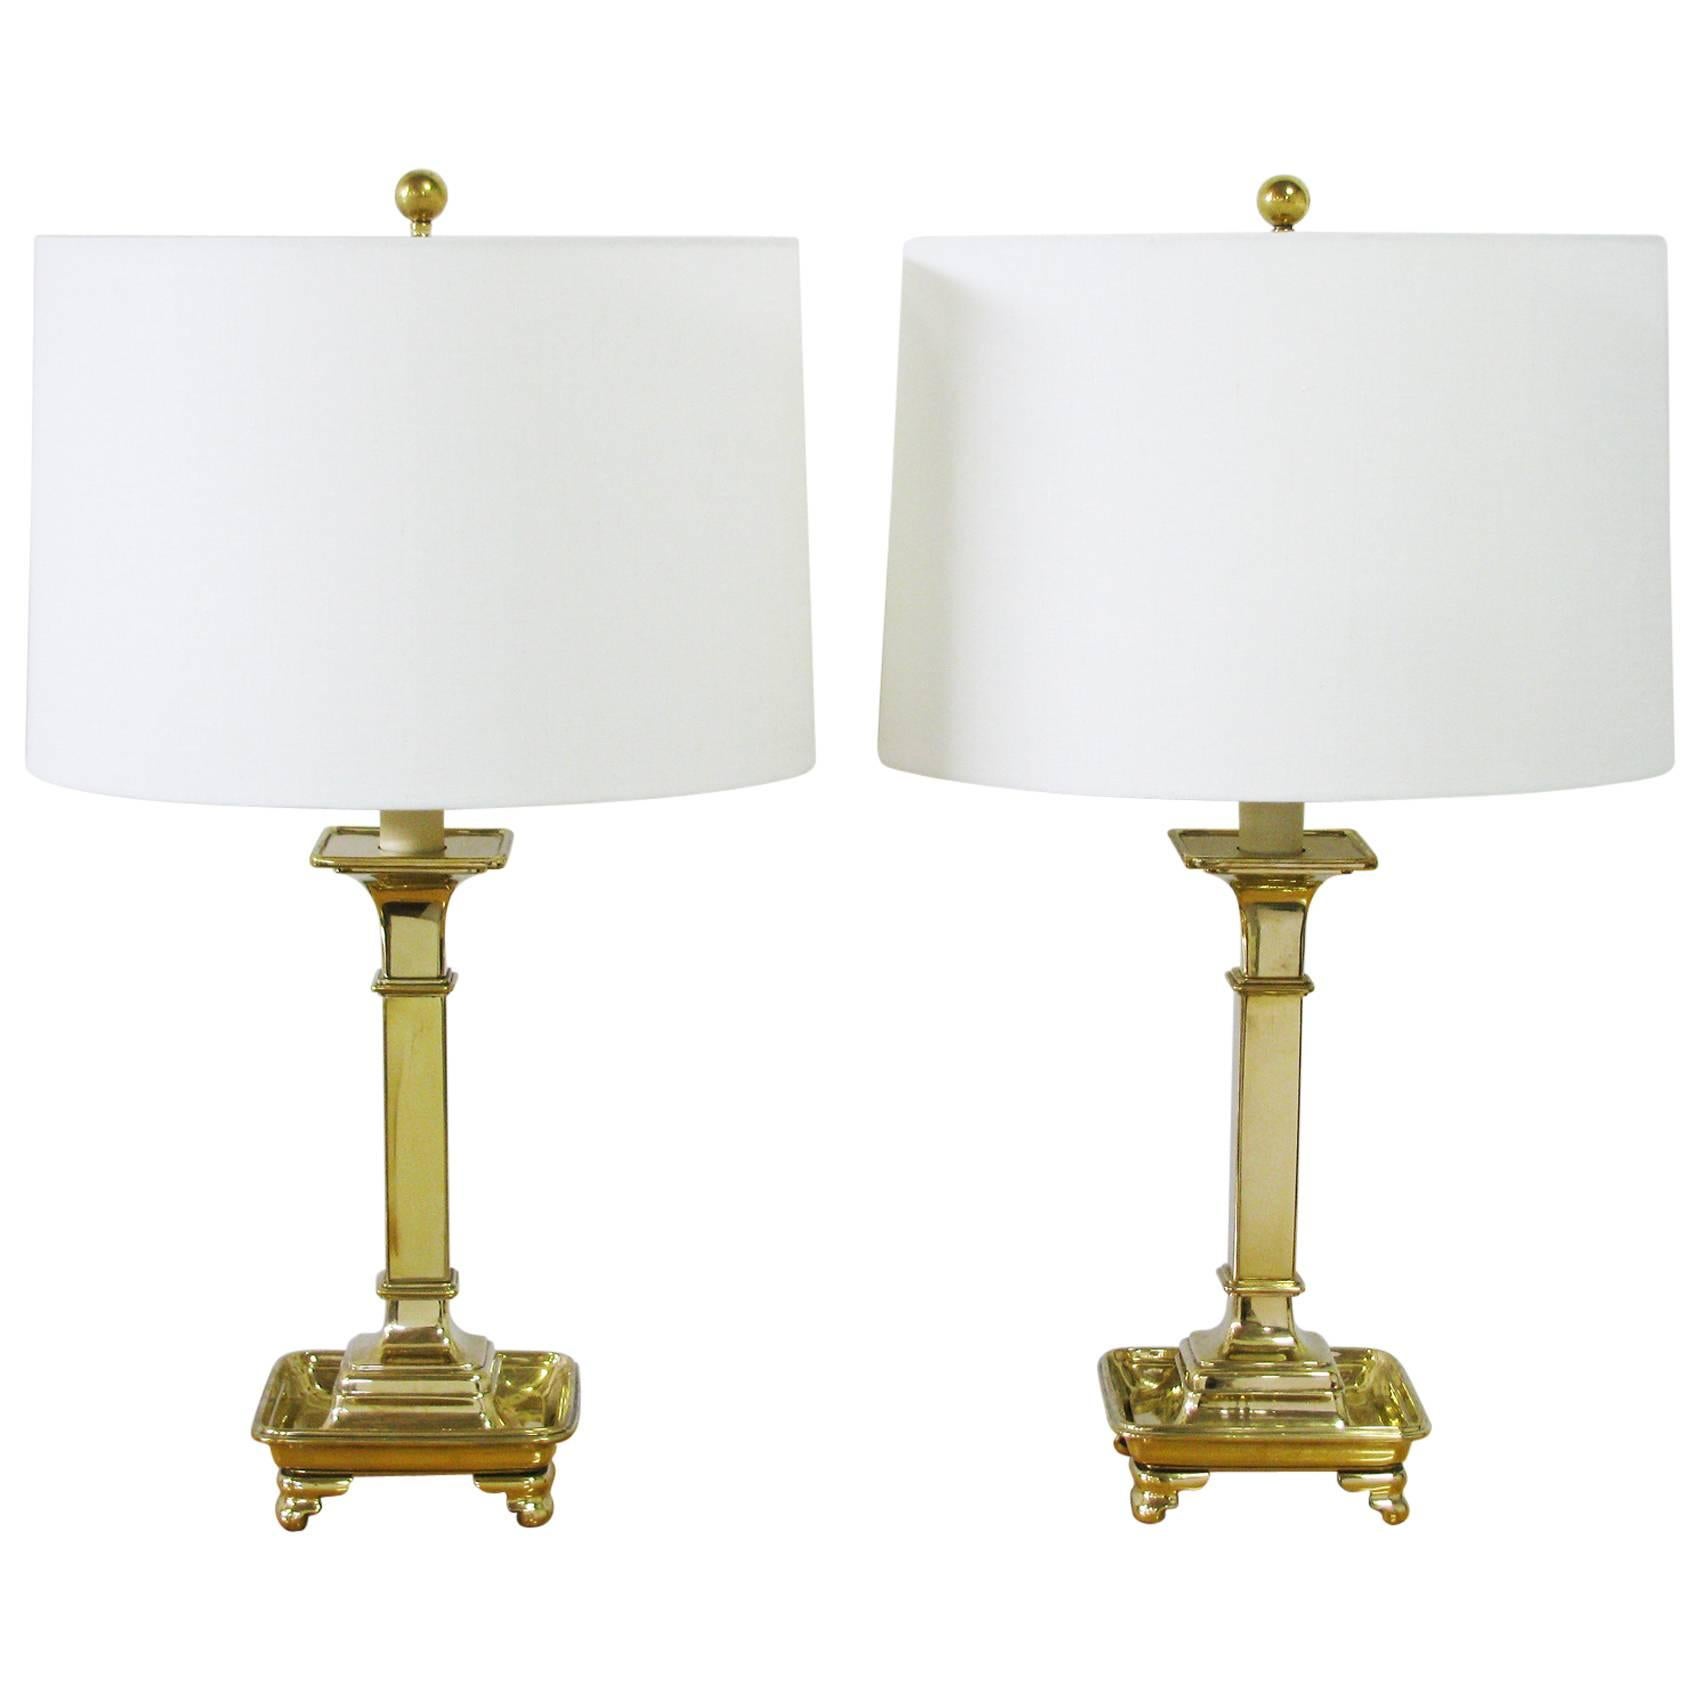 Pair of Brass Table Lamps by Chapman